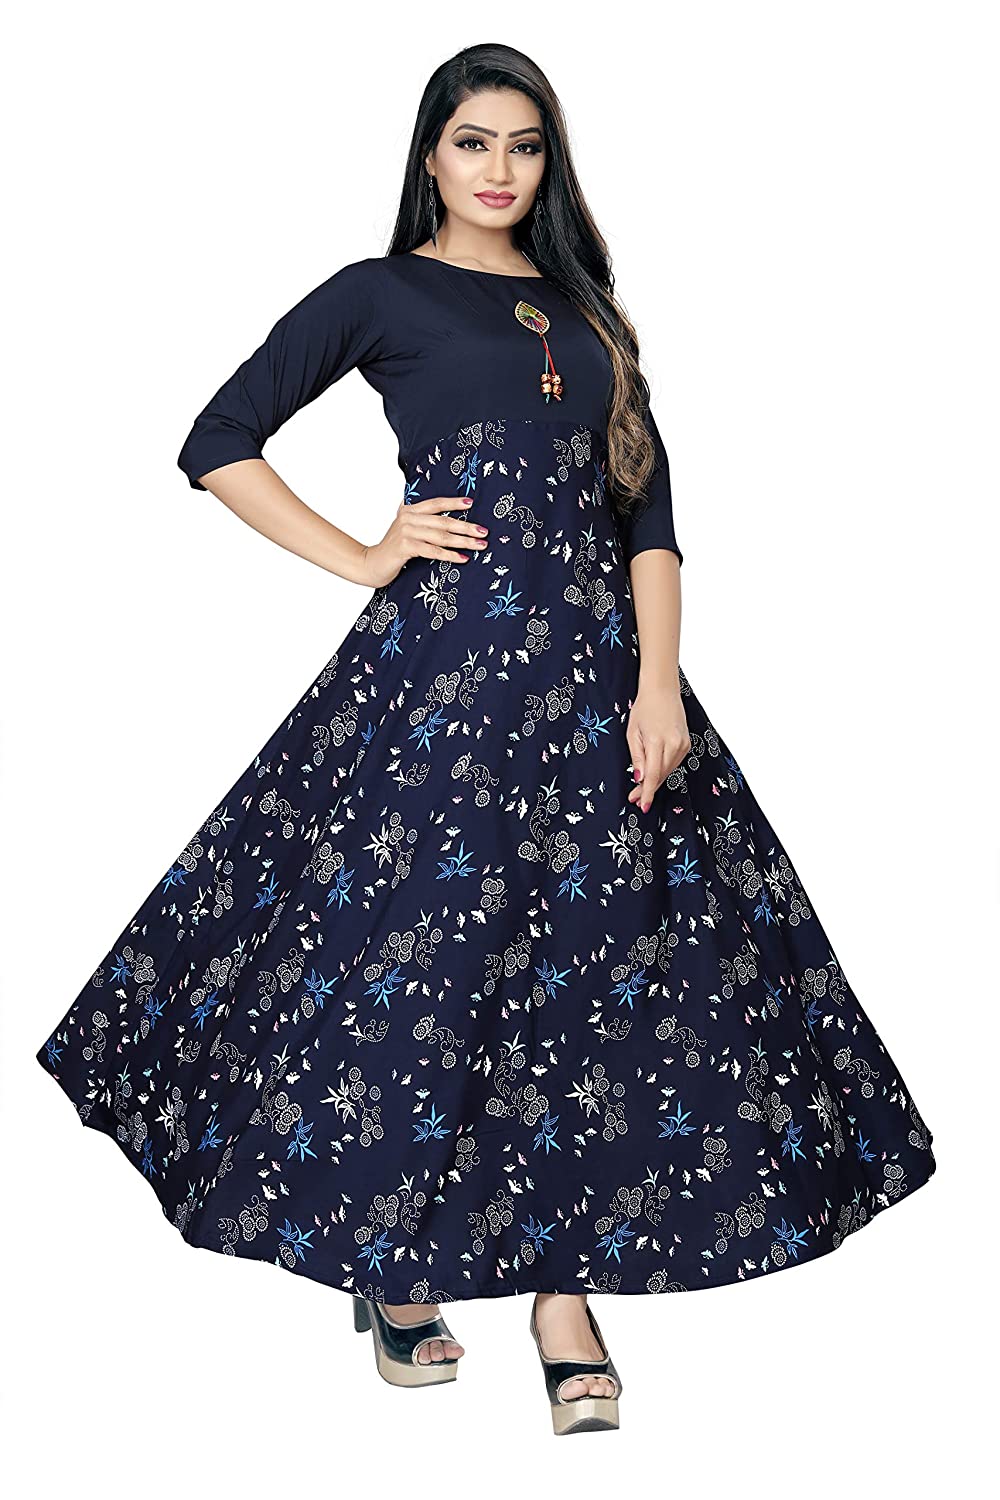 Casual mix Ladies Maxi Dress at Rs 1200/piece in Surat | ID: 2850325409512